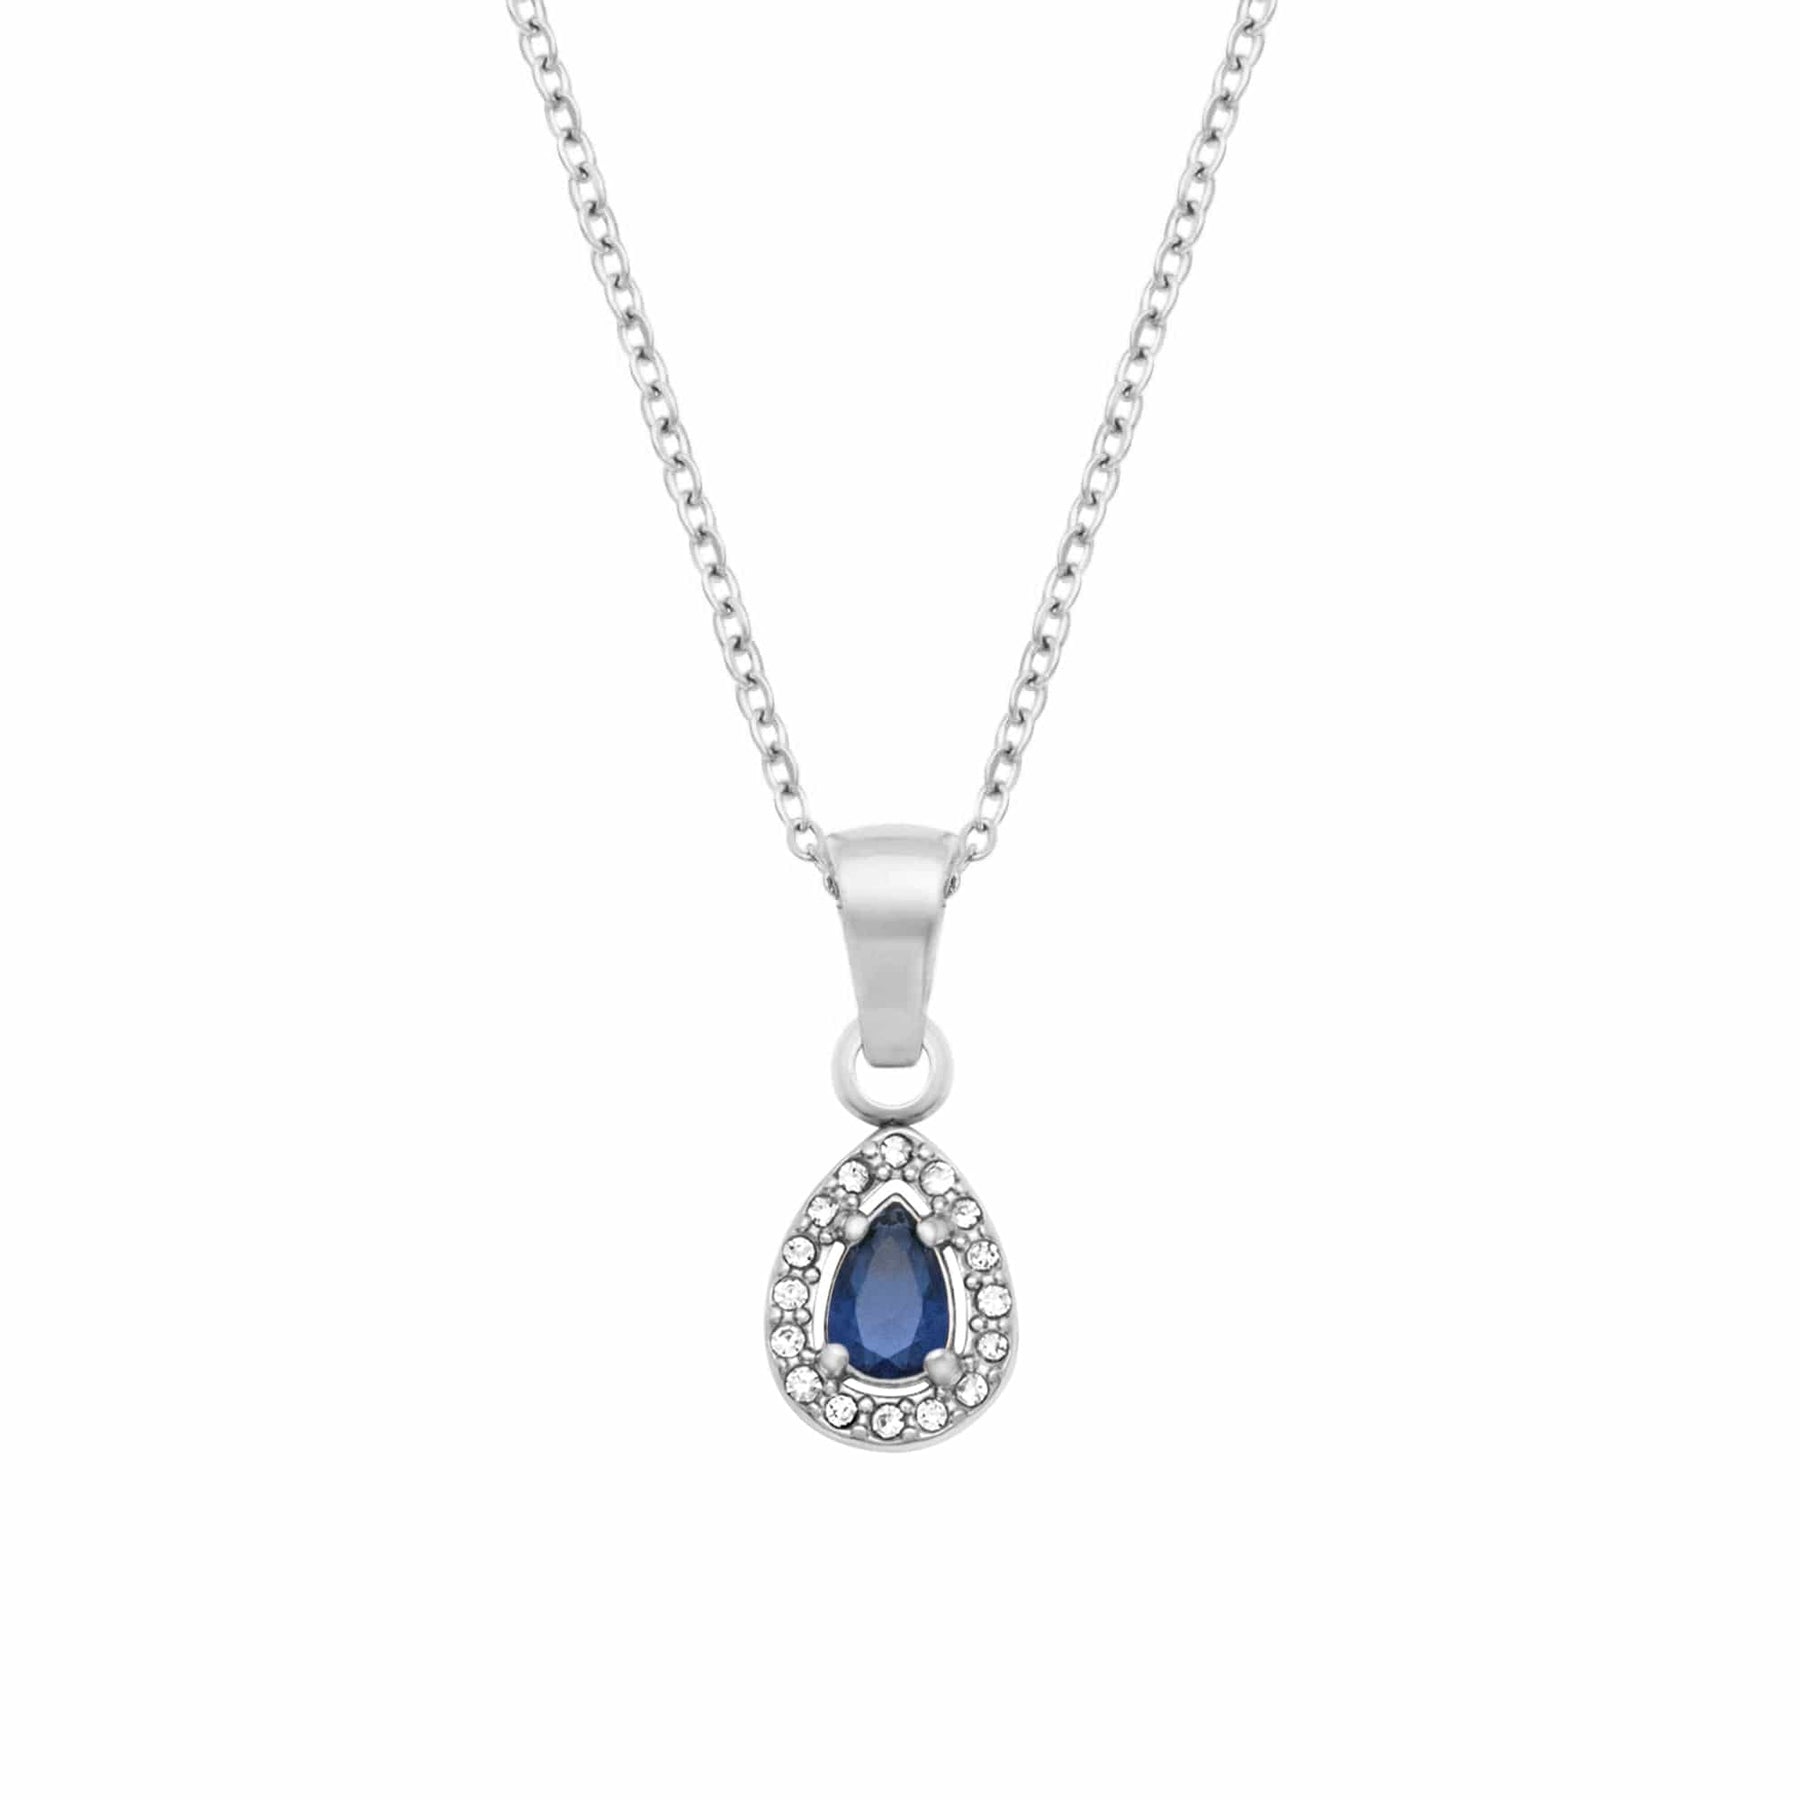 BohoMoon Stainless Steel Alcudia Necklace Silver / Blue